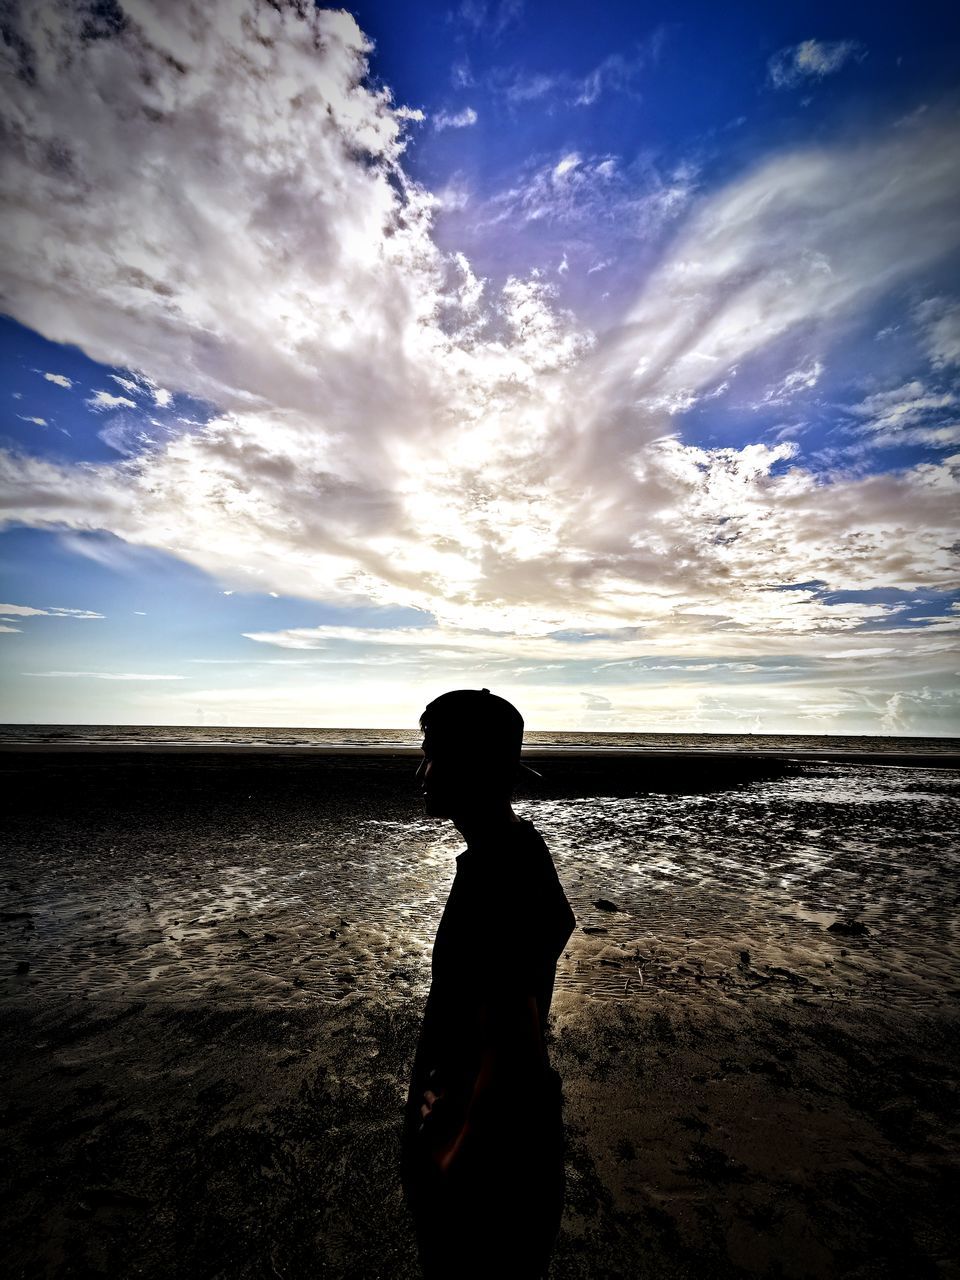 sky, horizon, cloud, water, sea, beach, sunlight, land, sunset, ocean, nature, one person, reflection, dusk, child, beauty in nature, light, scenics - nature, wave, silhouette, horizon over water, childhood, evening, coast, sun, holiday, vacation, men, trip, standing, tranquility, sand, shore, leisure activity, rear view, outdoors, darkness, tranquil scene, blue, emotion, person, environment, solitude, three quarter length, adult, lifestyles